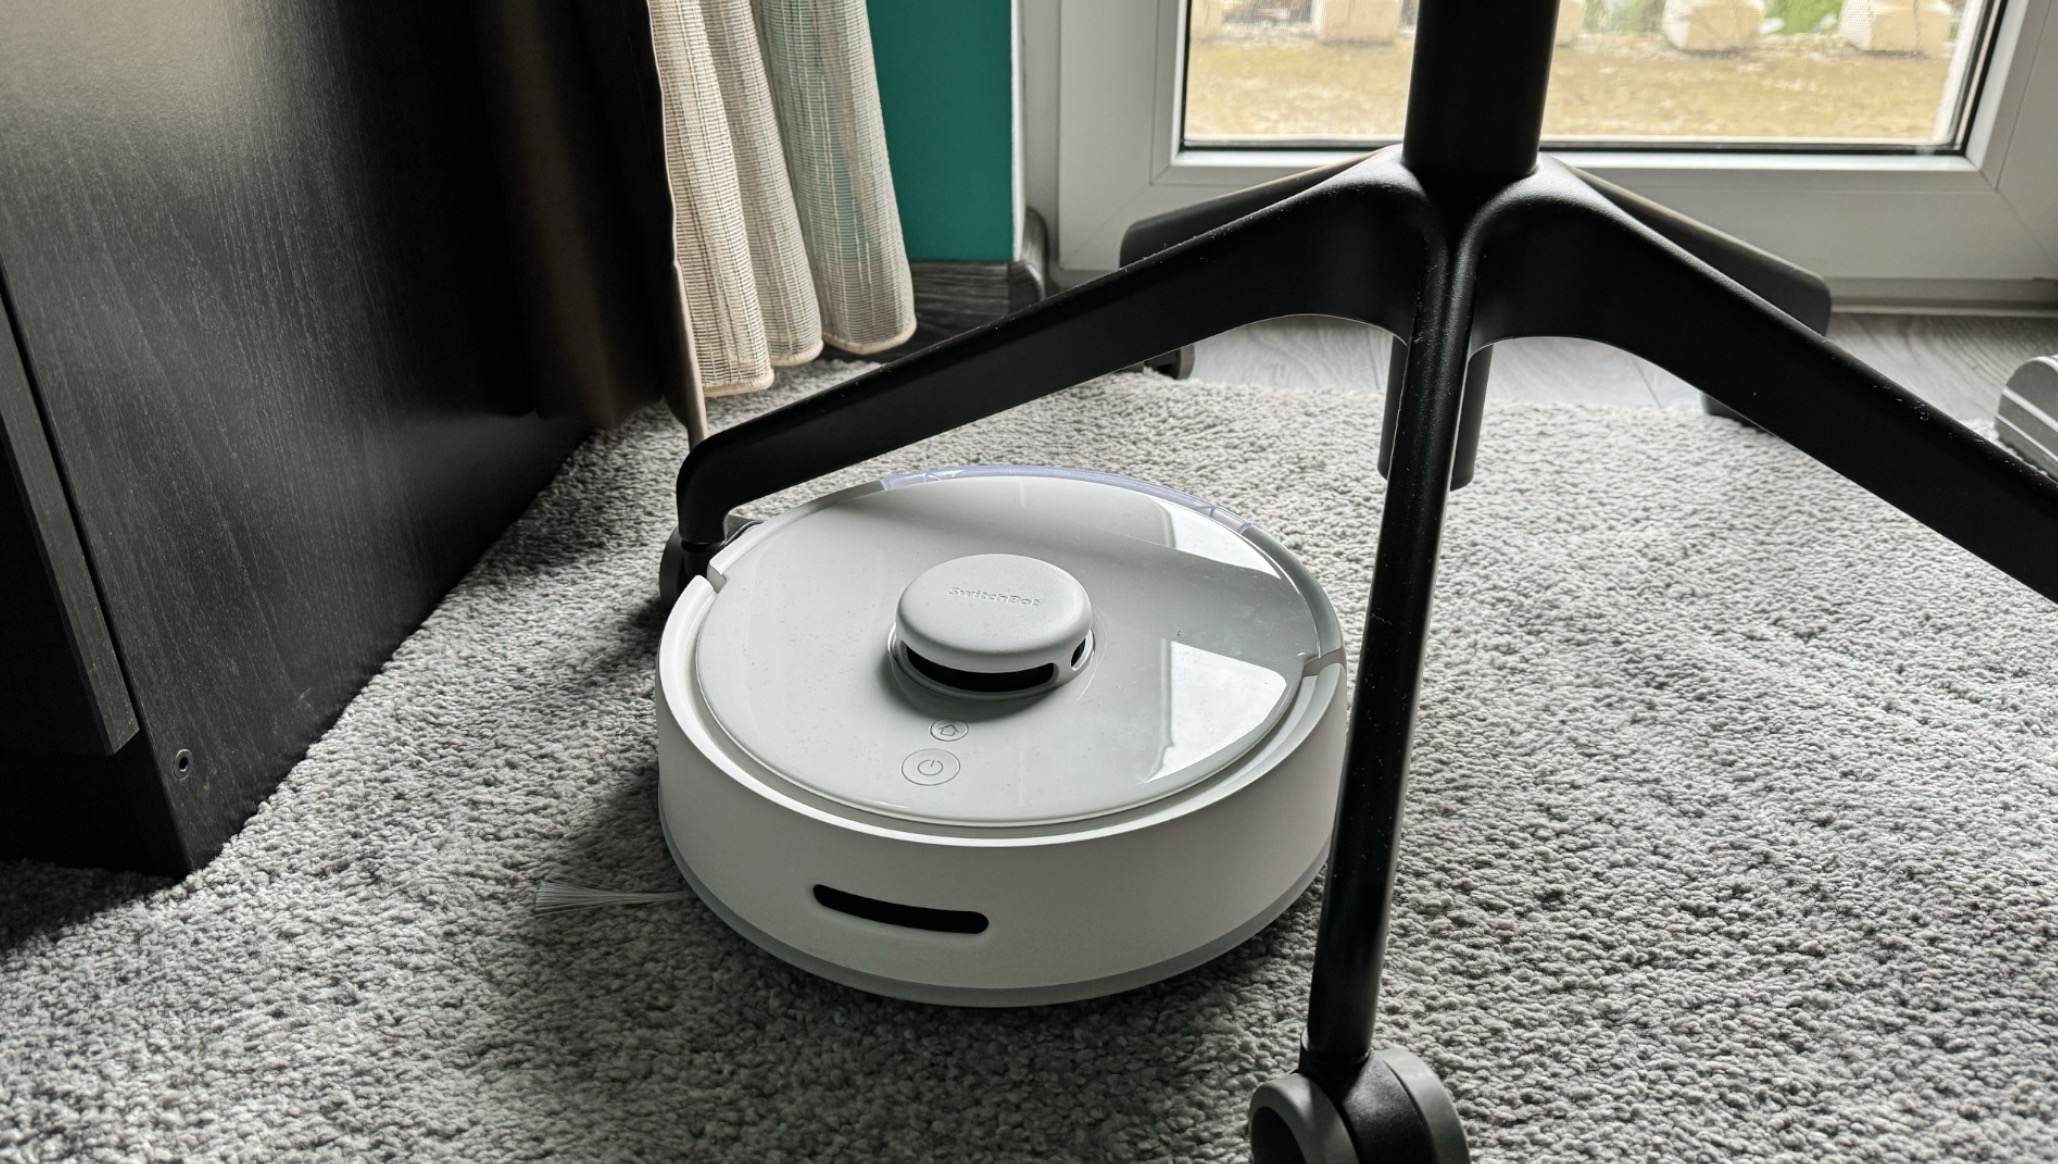 My Previous Robot Vacuum Cleaner can't fit under this chair